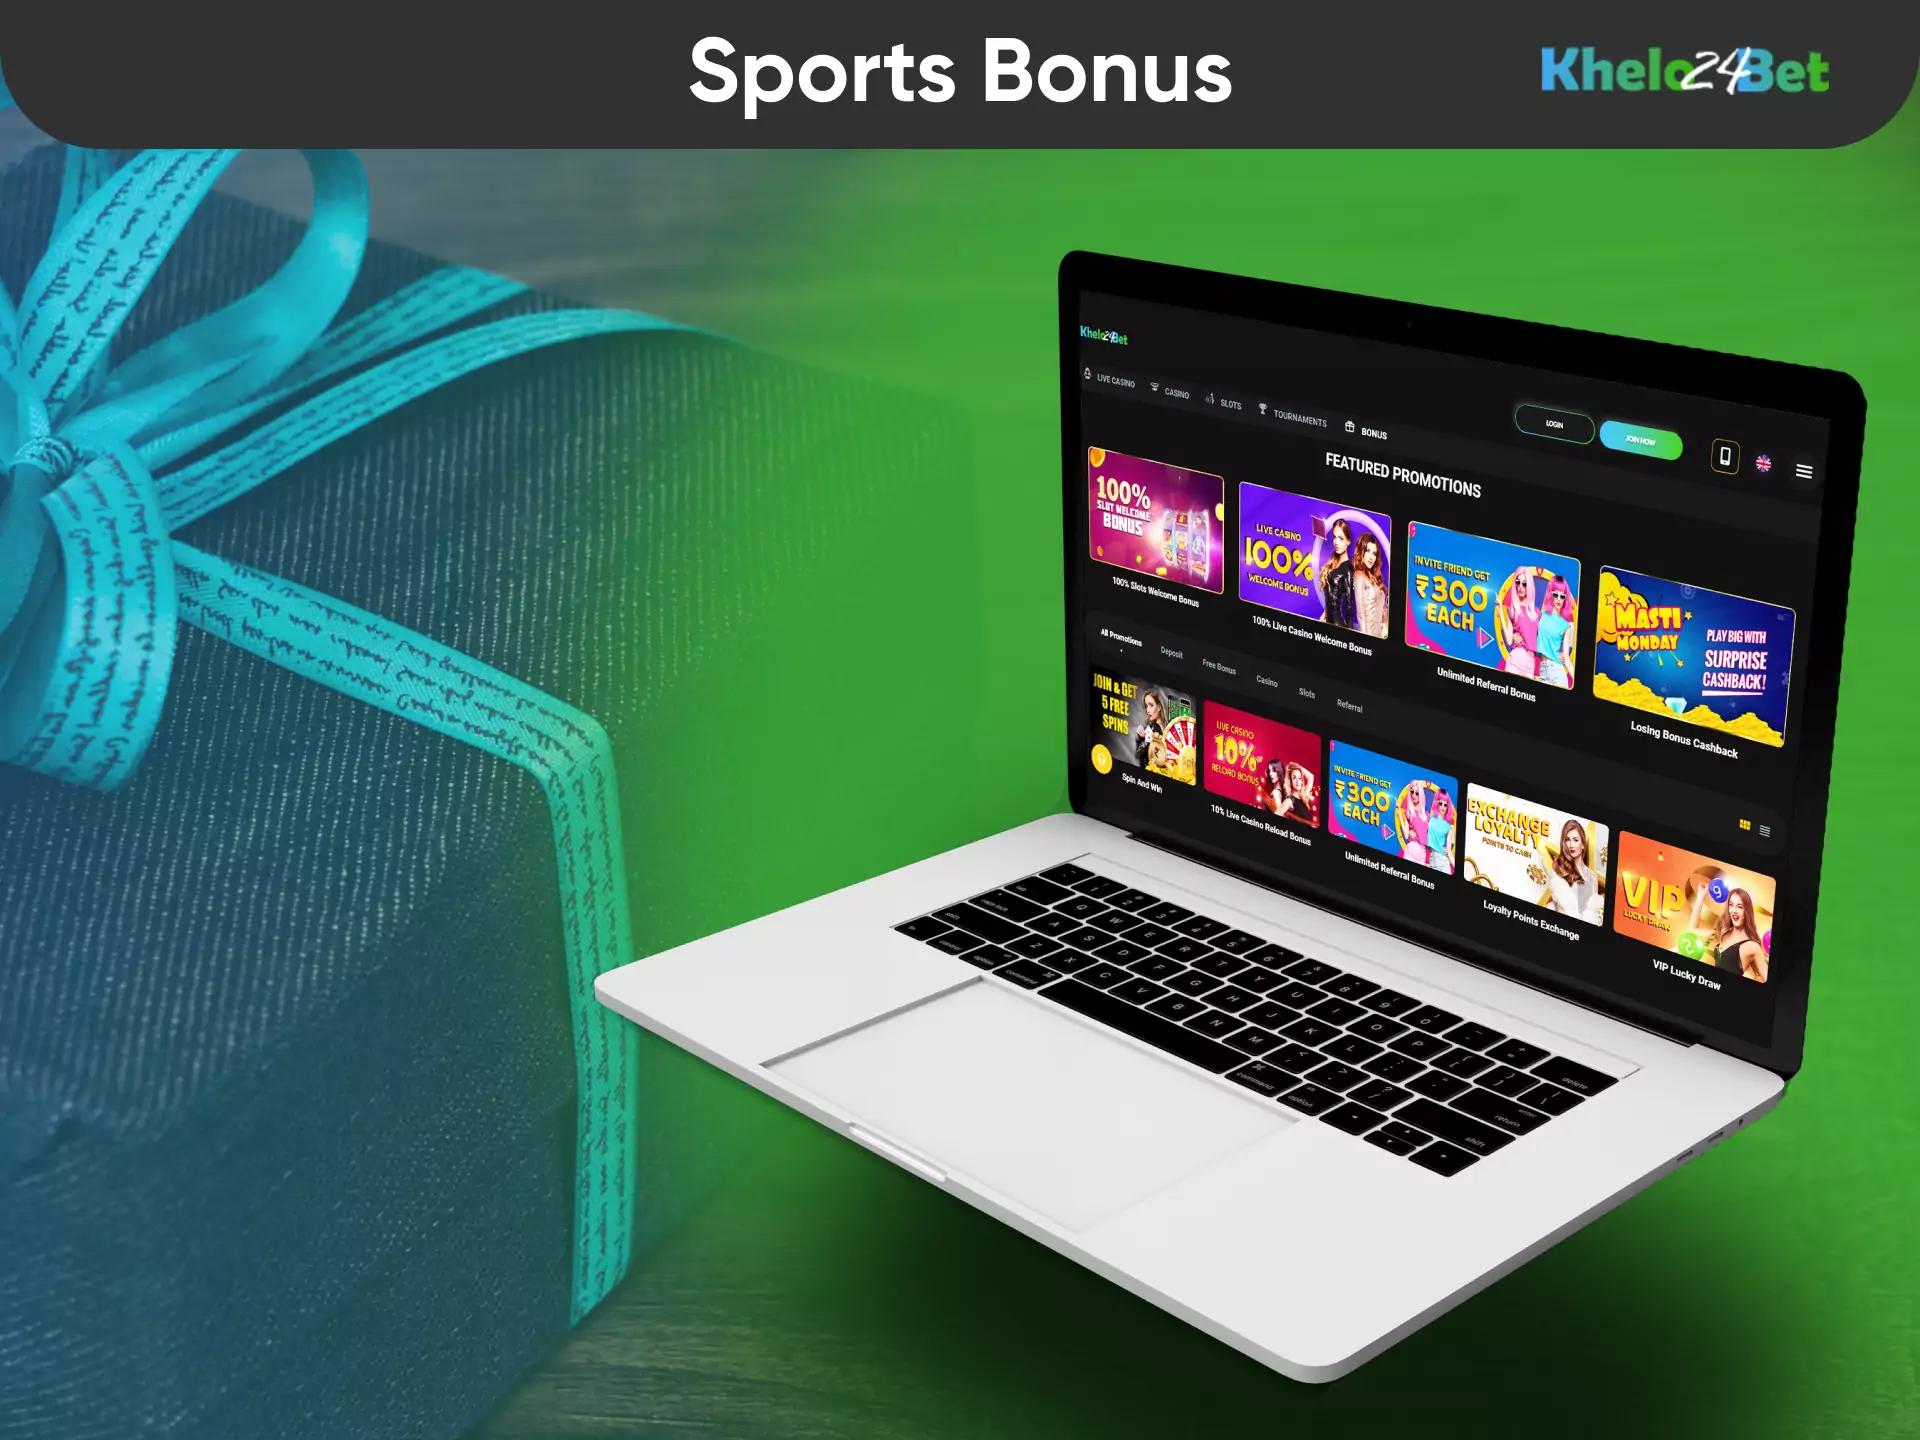 For sports fans, there is a welcome offer from Khelo24bet.